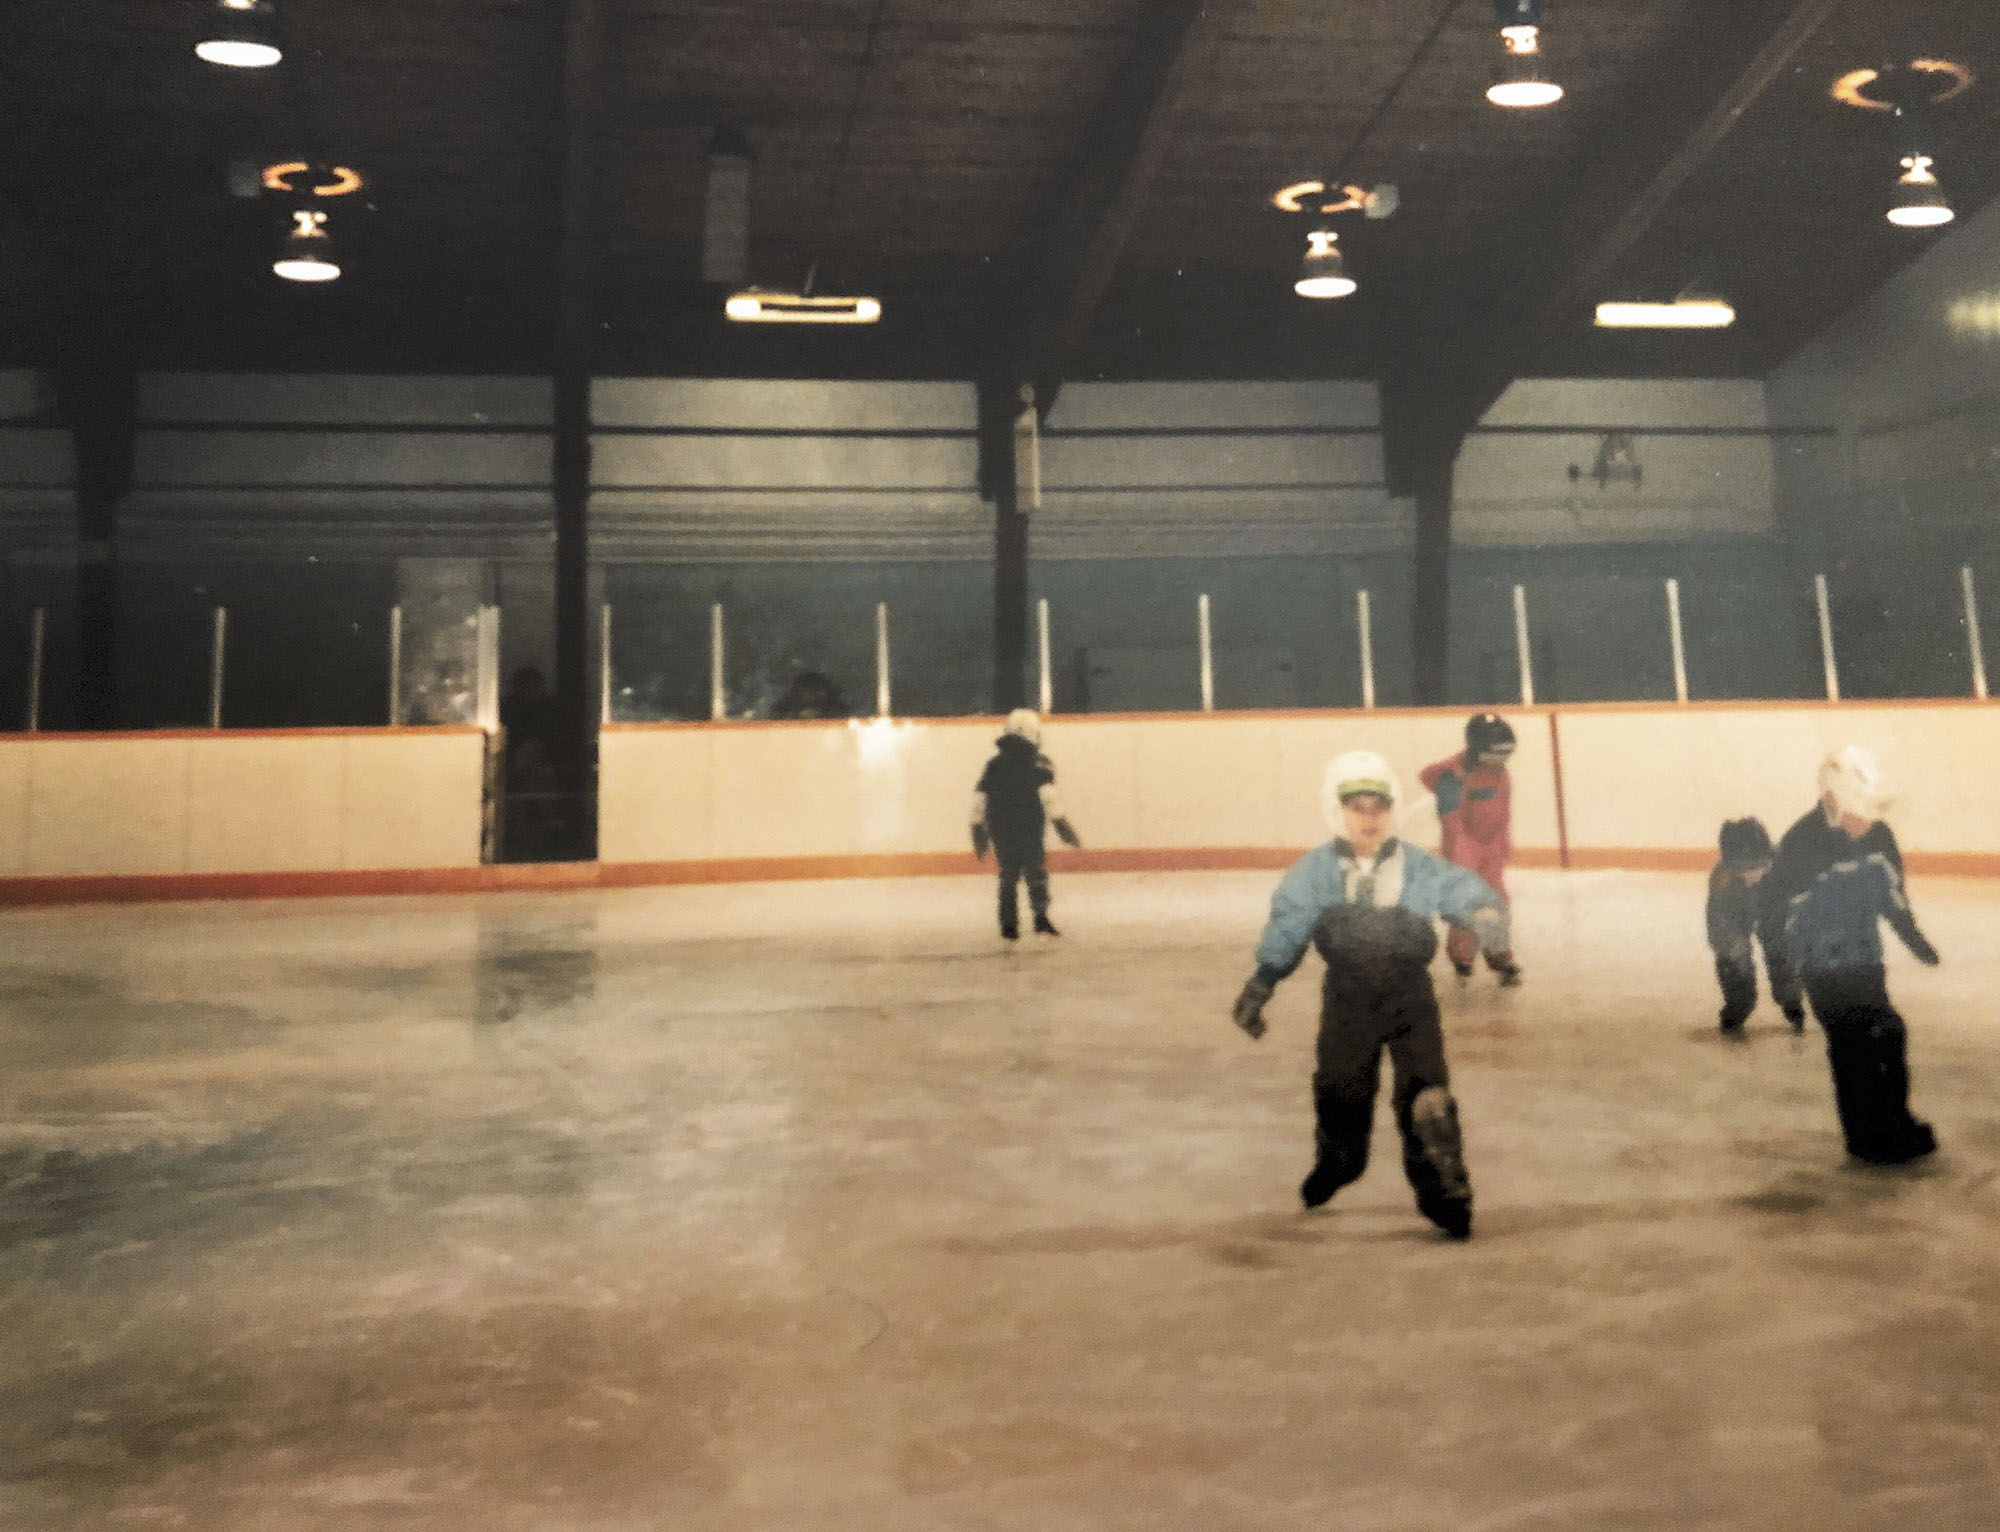 Christopher Ali and 4 friends dressed in warm clothing skating on the ice as children